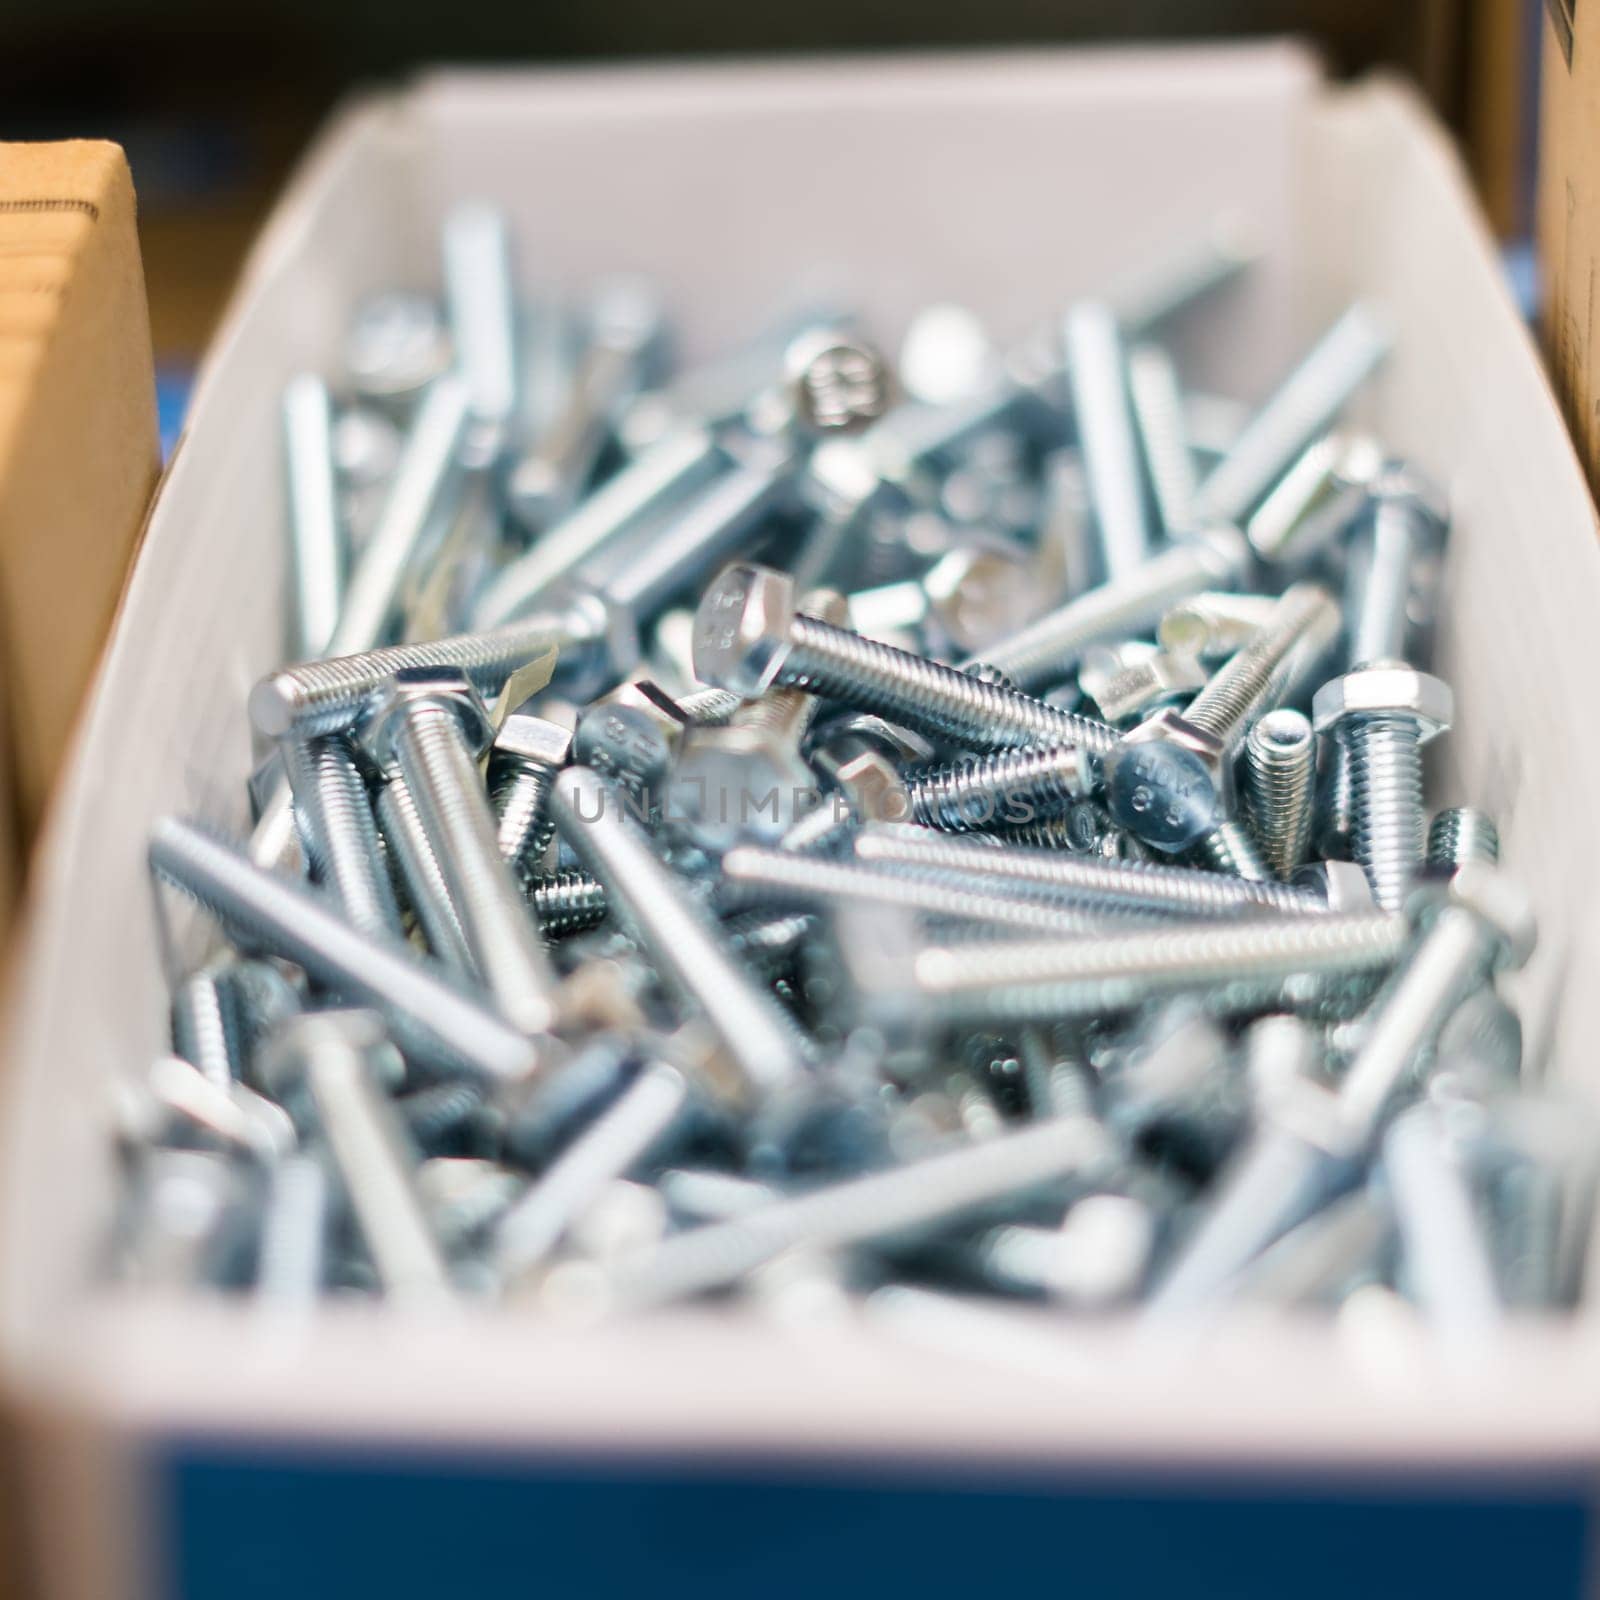 Small thin metal nails, hardware, screw lying in a store container. by Zelenin